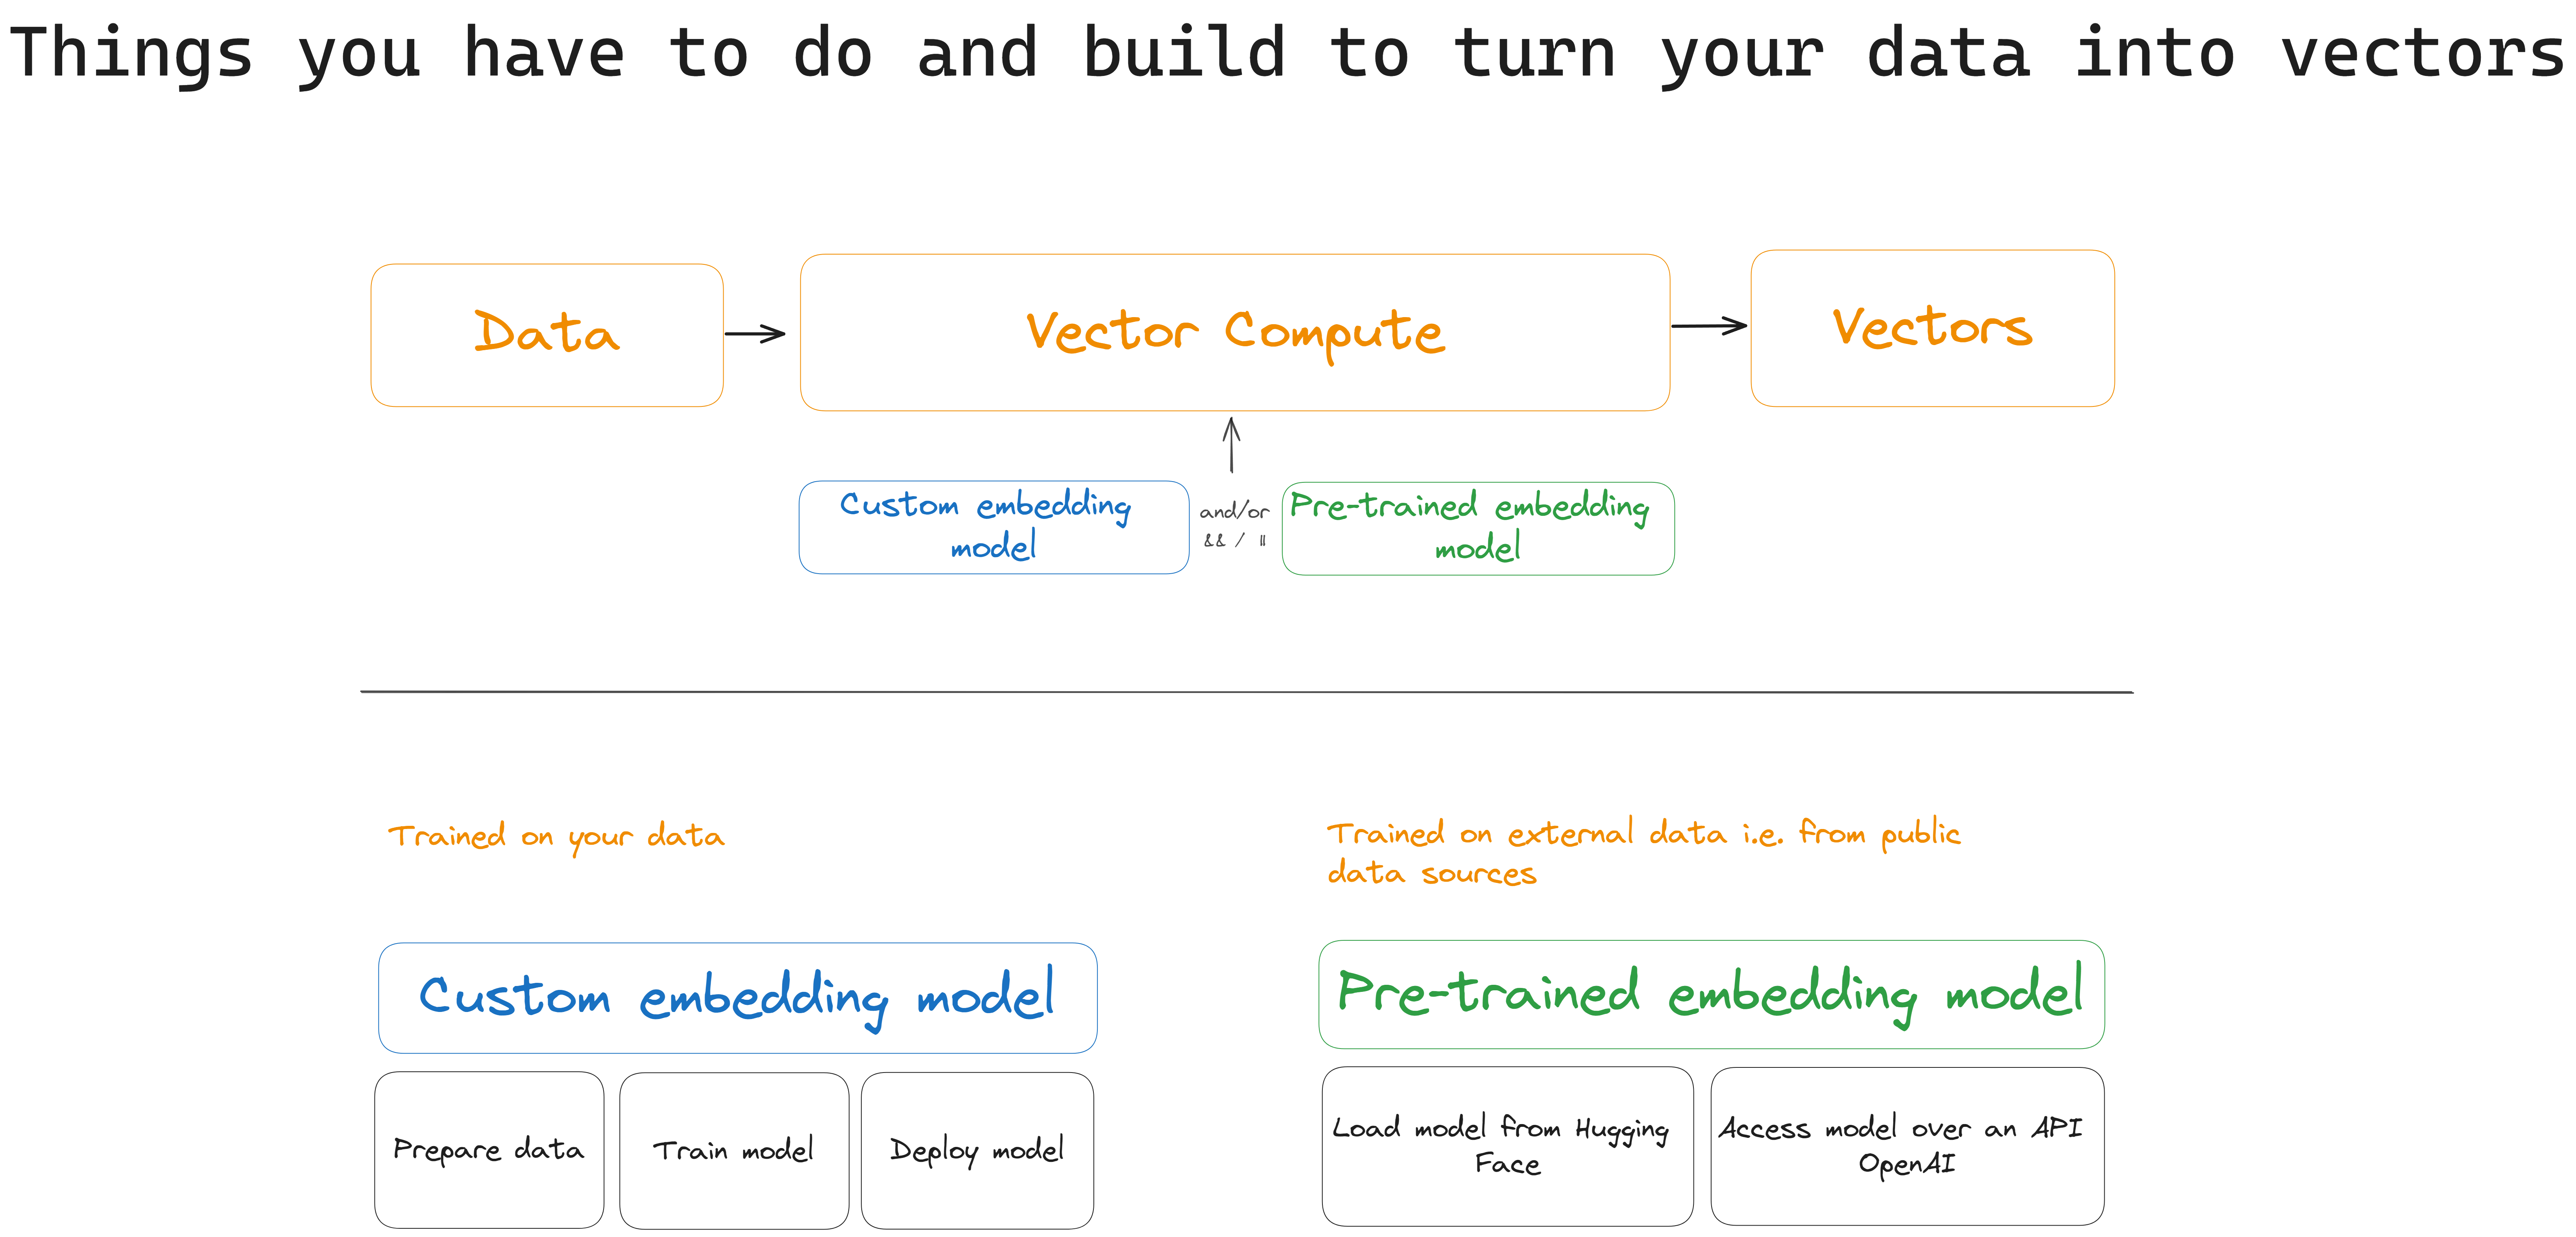 Things you have to do and build to turn your data into vectors